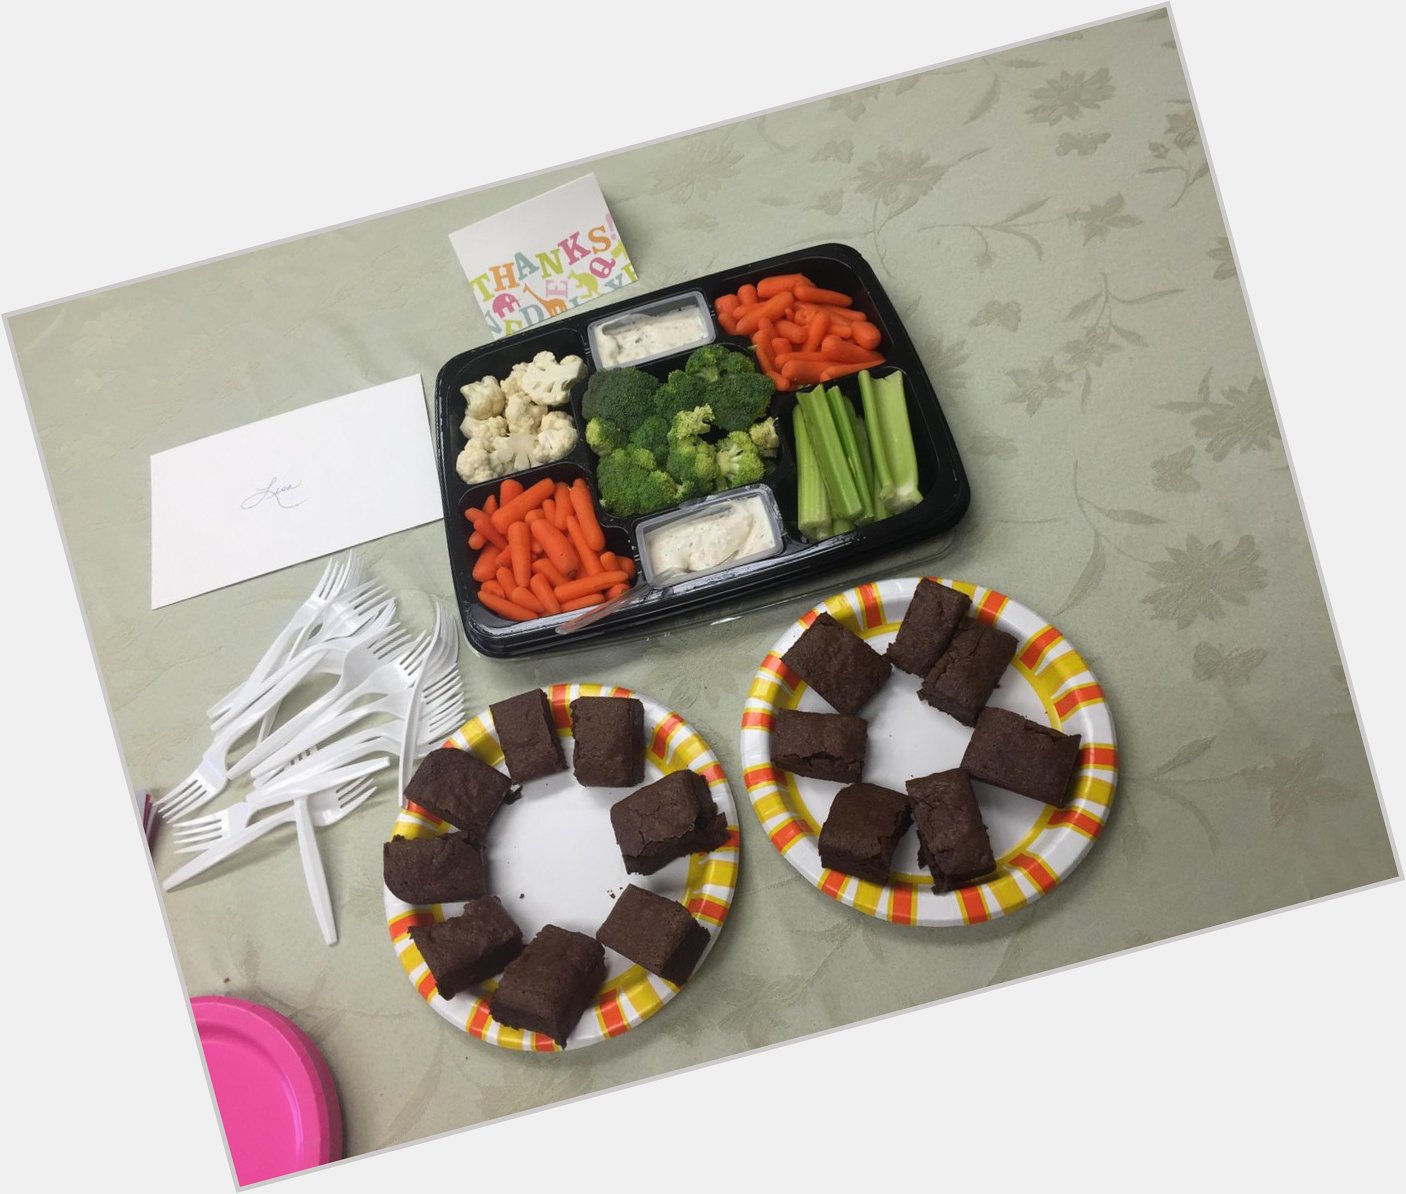 Today, we celebrate Lisa s birthday (Friday) with brownies and....Veggies. Yes, that is correct. Happy belated Lisa! 